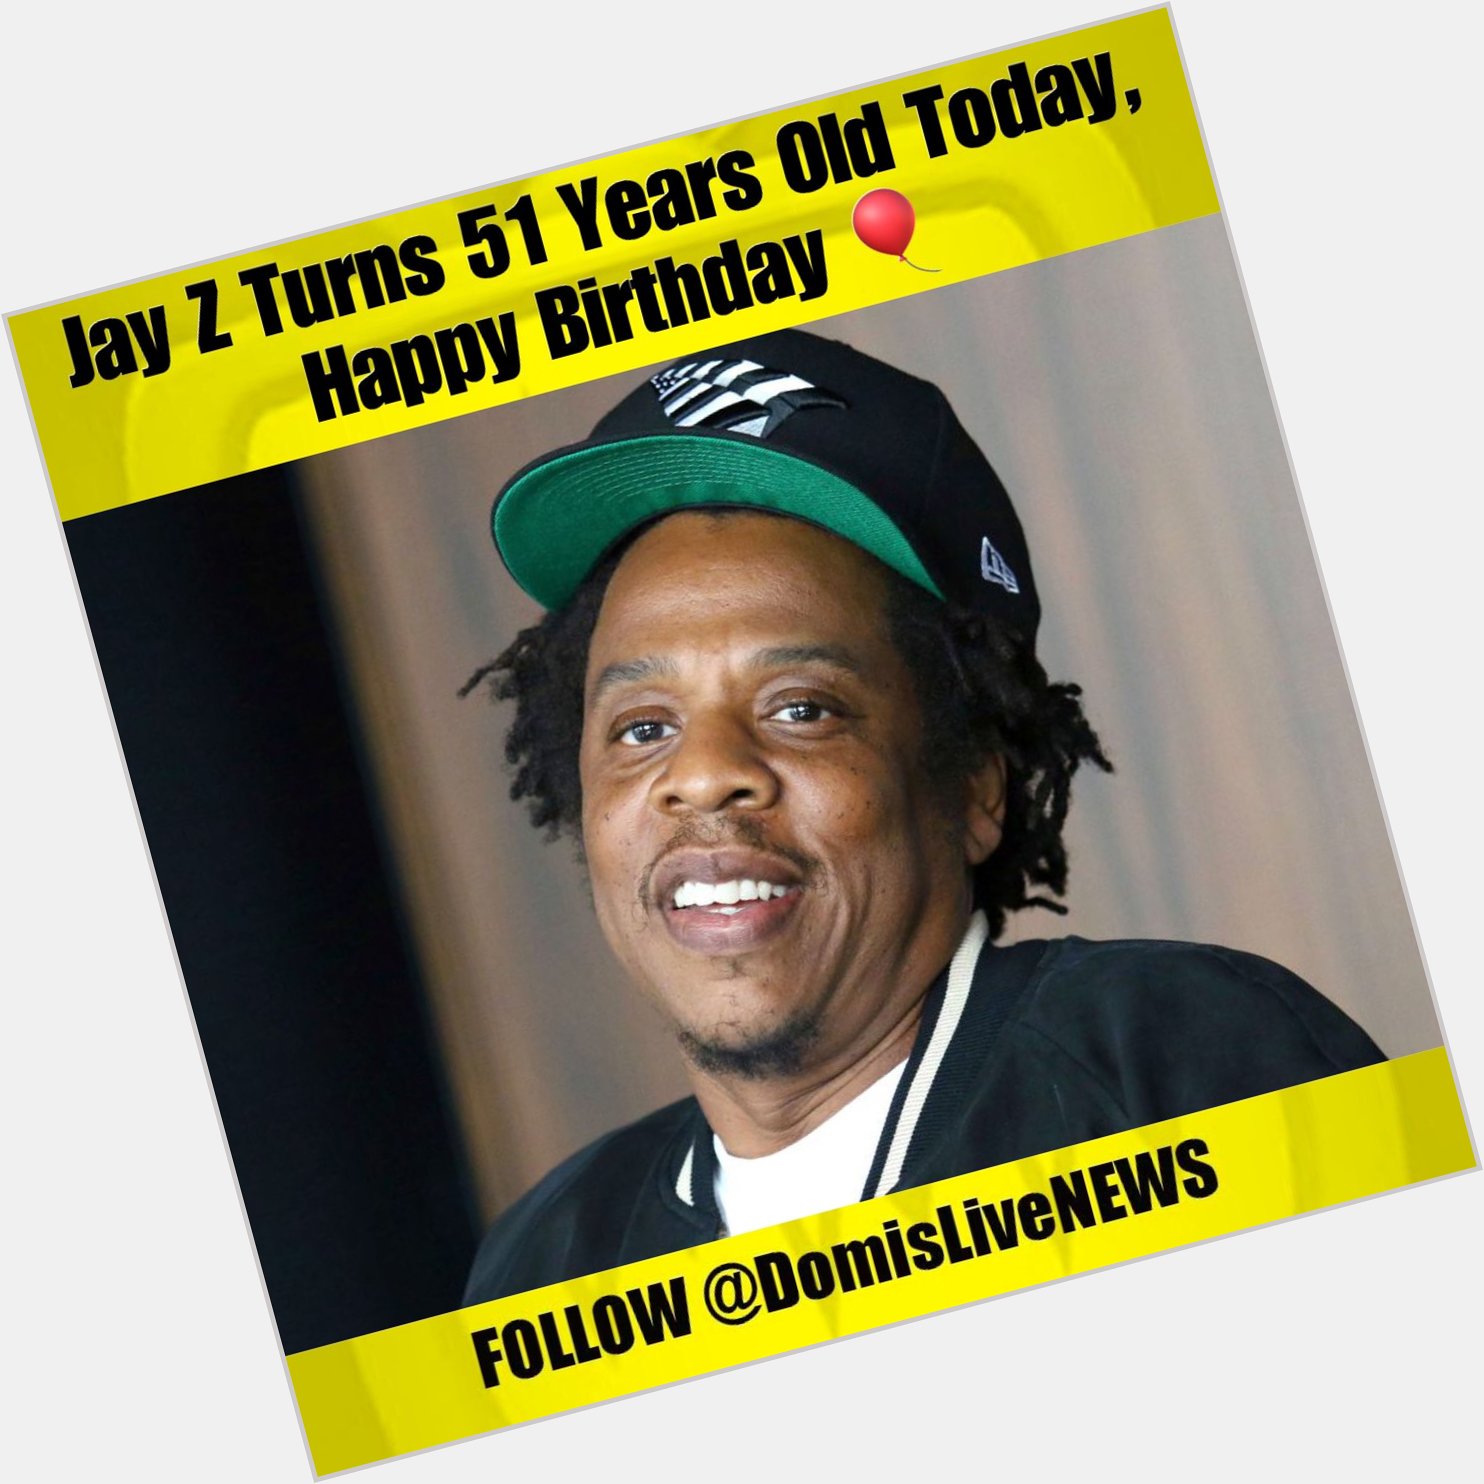 Jay Z Turns 51 Years Old Today, Happy Birthday 